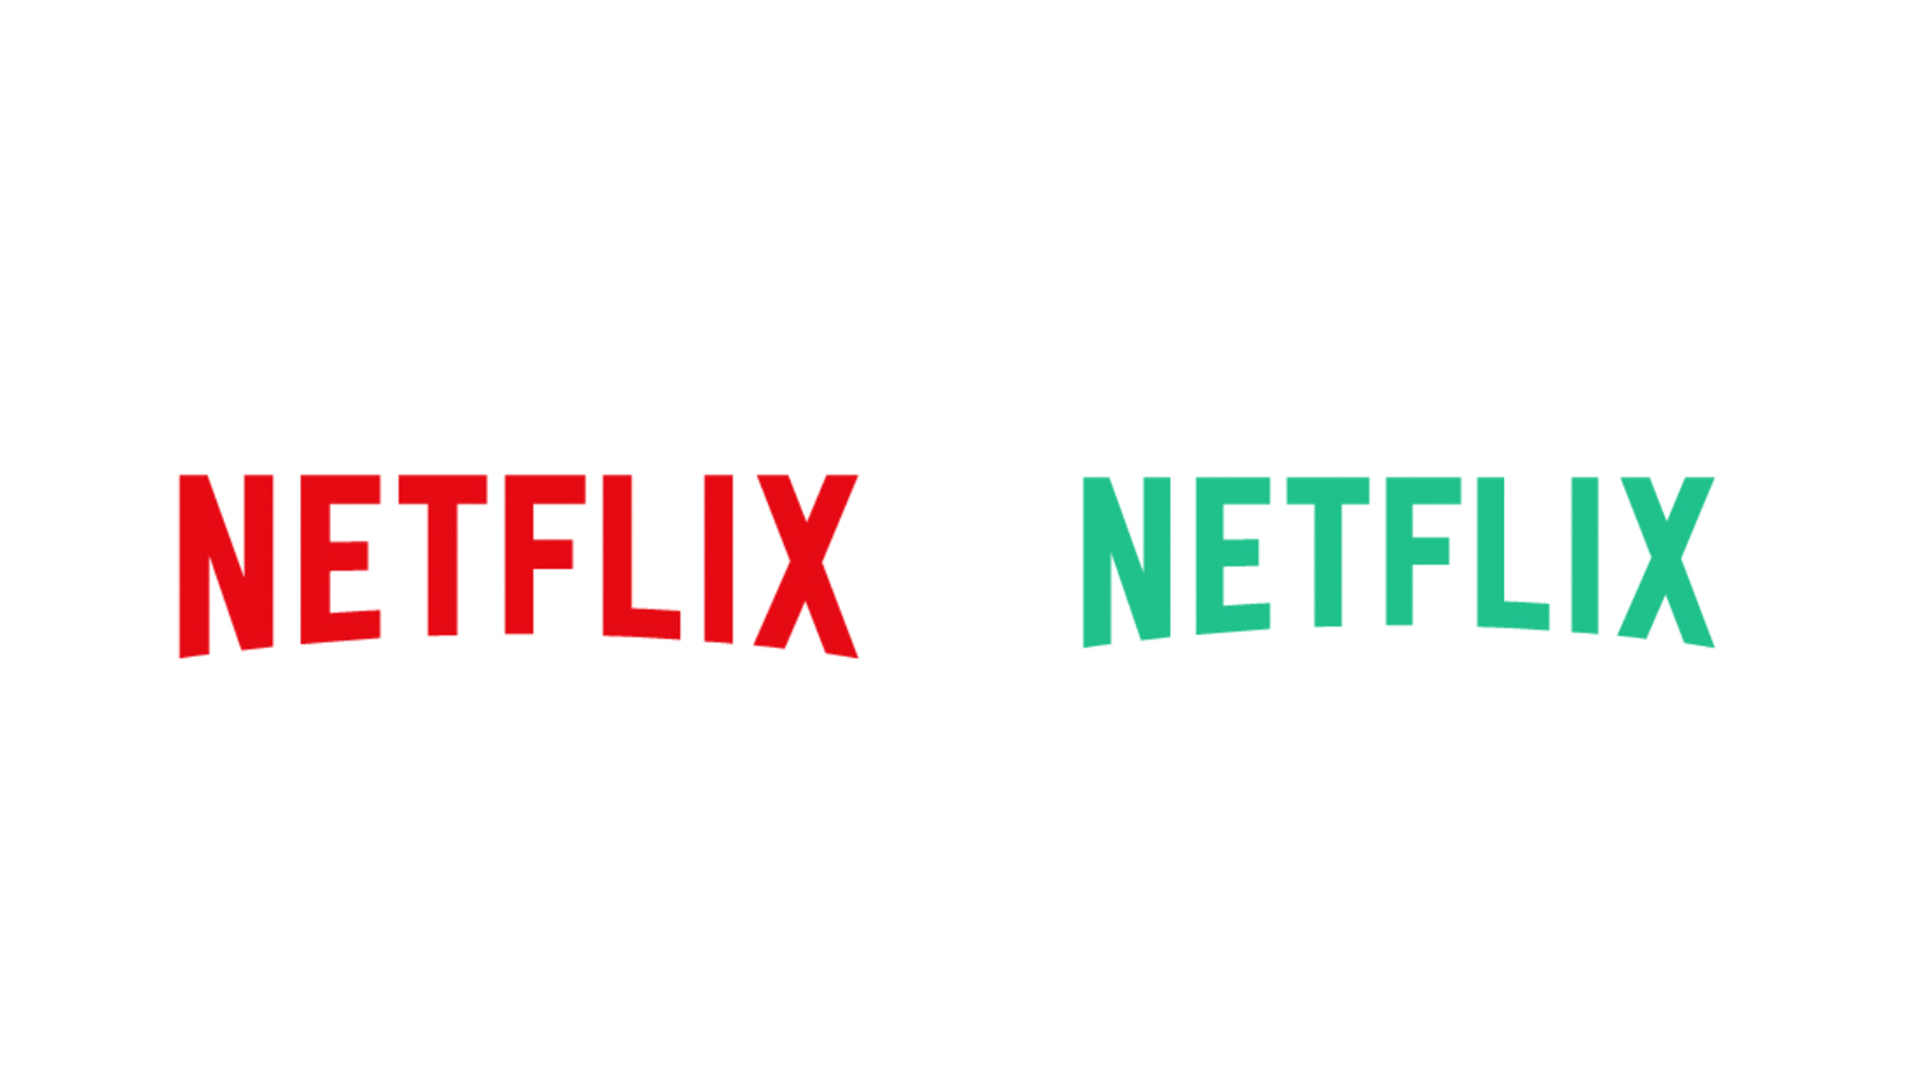 Netflix logo in red and green